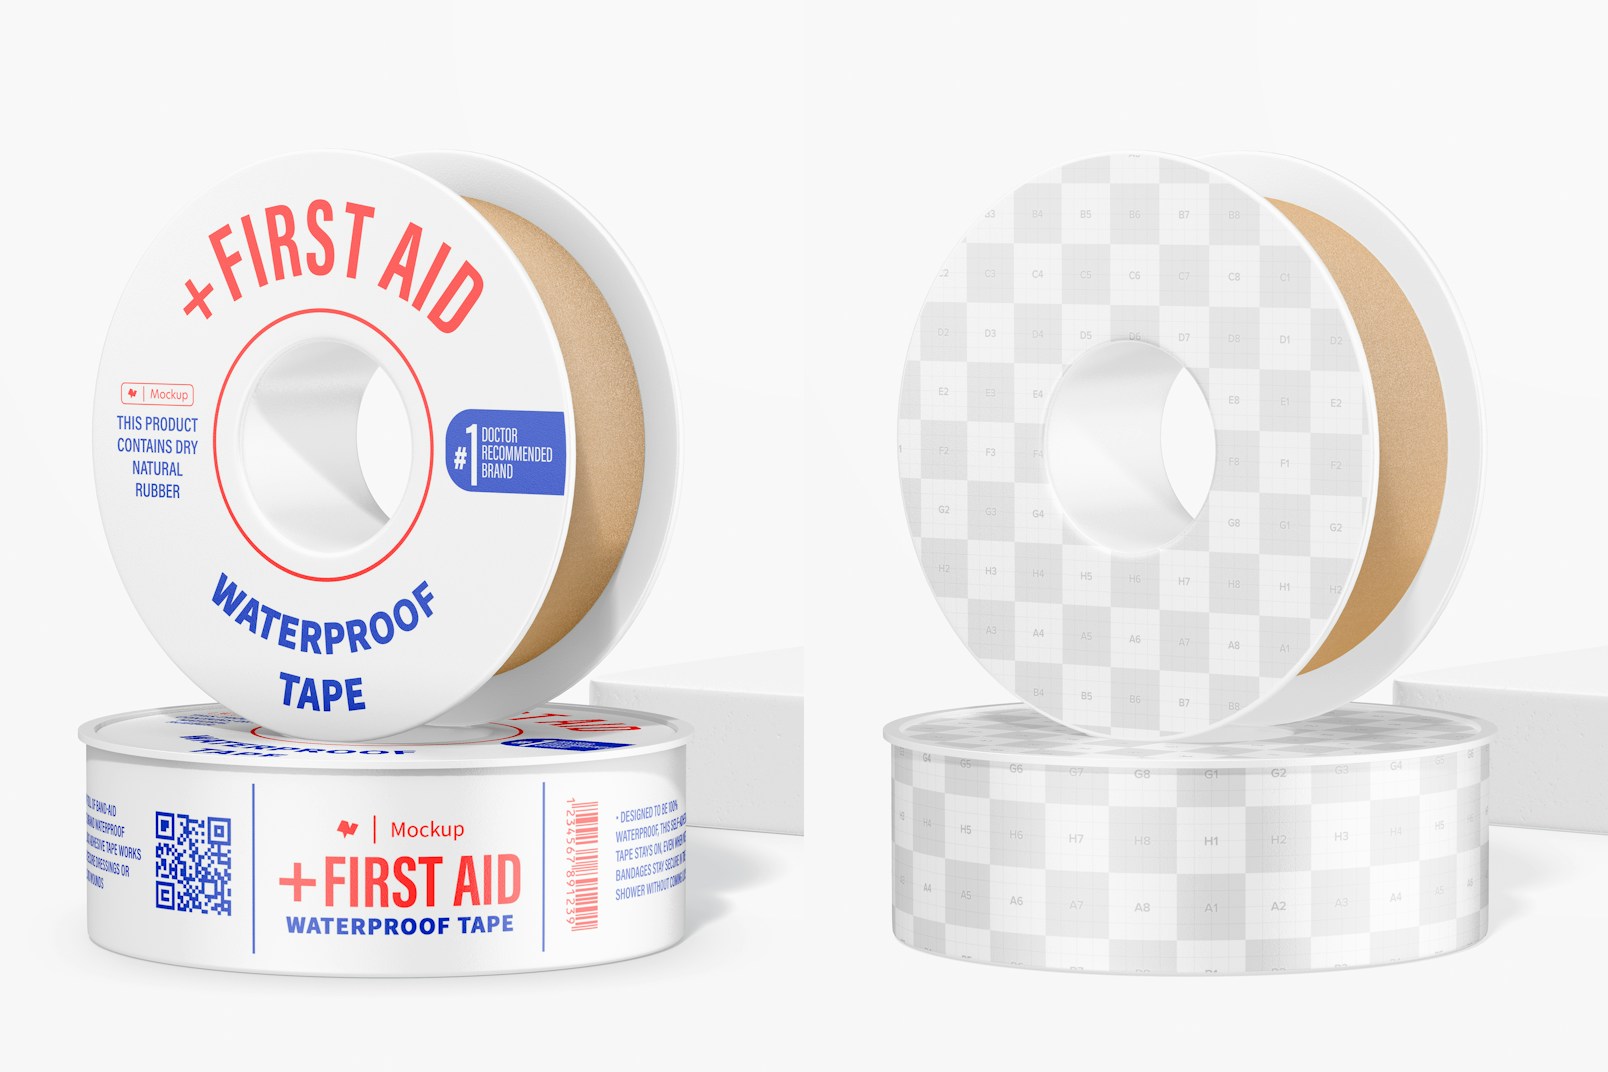 First Aid Waterproof Tapes Mockup